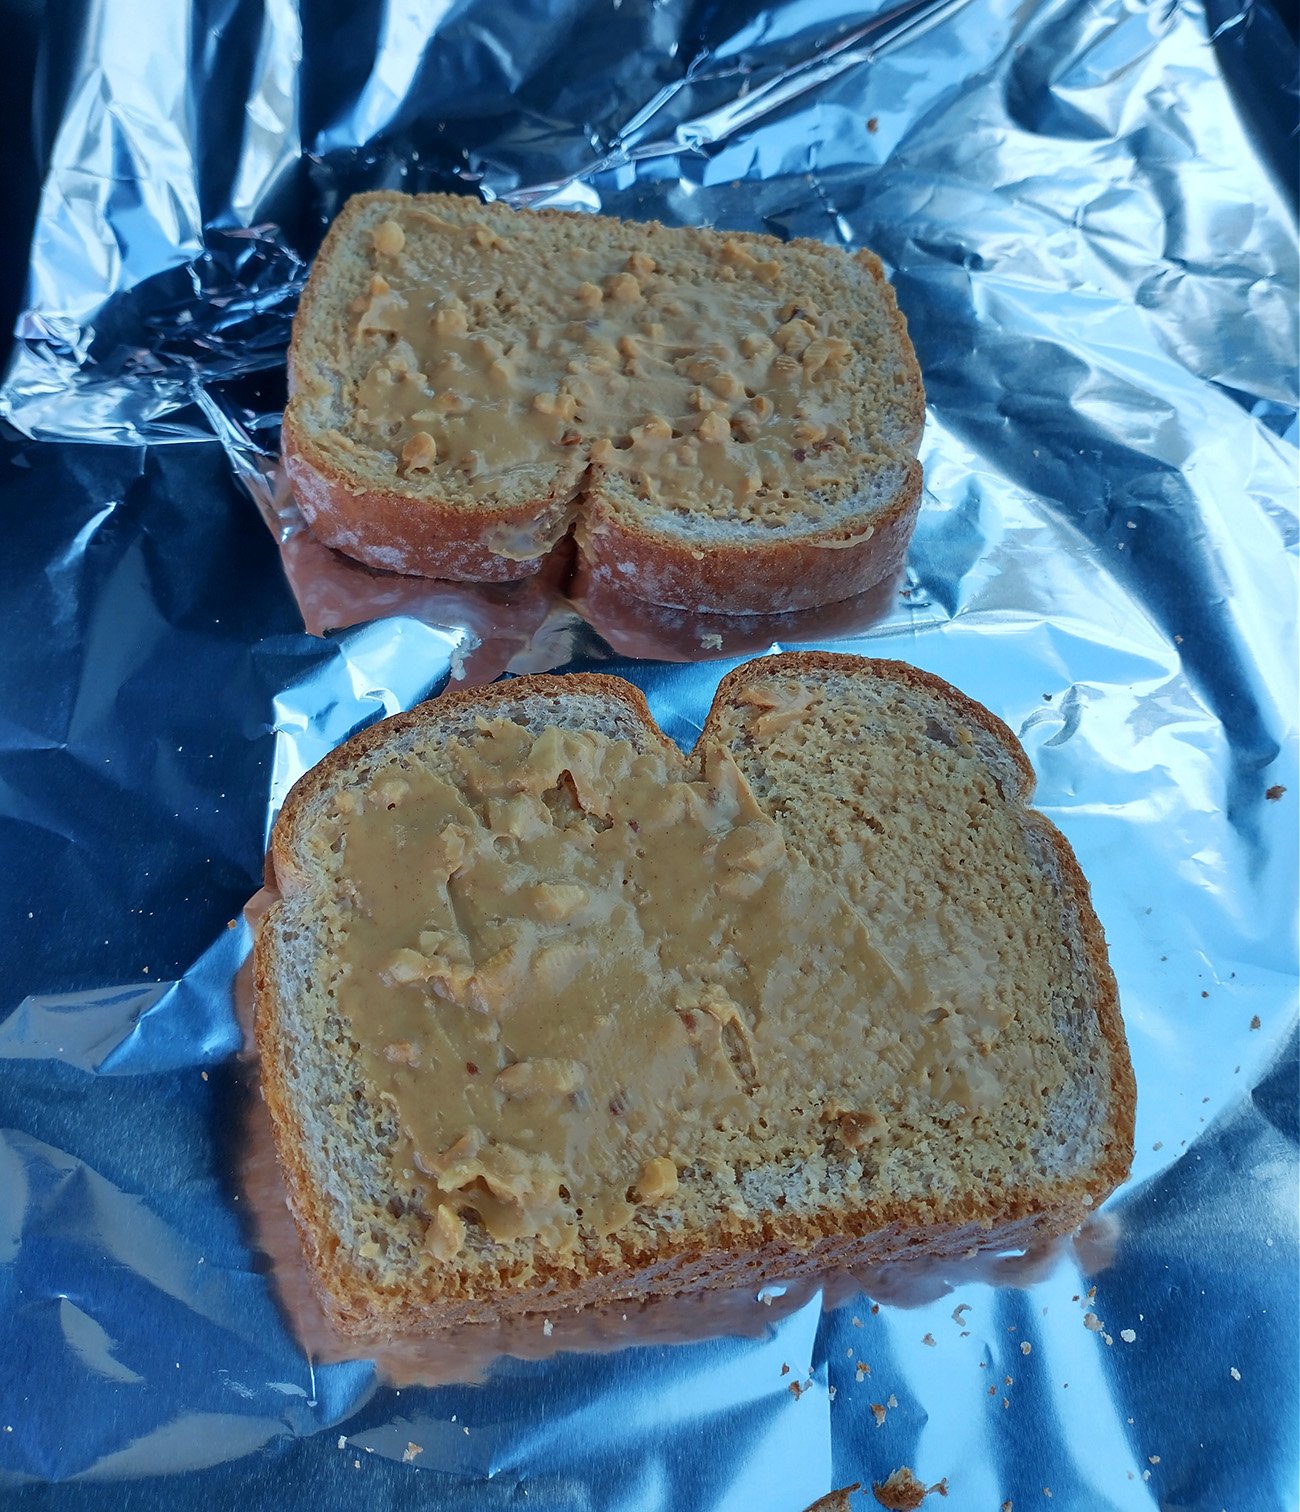 Simple ride fuel. Whole wheat bread + peanut butter. Don't need anything else if you aren't racing.